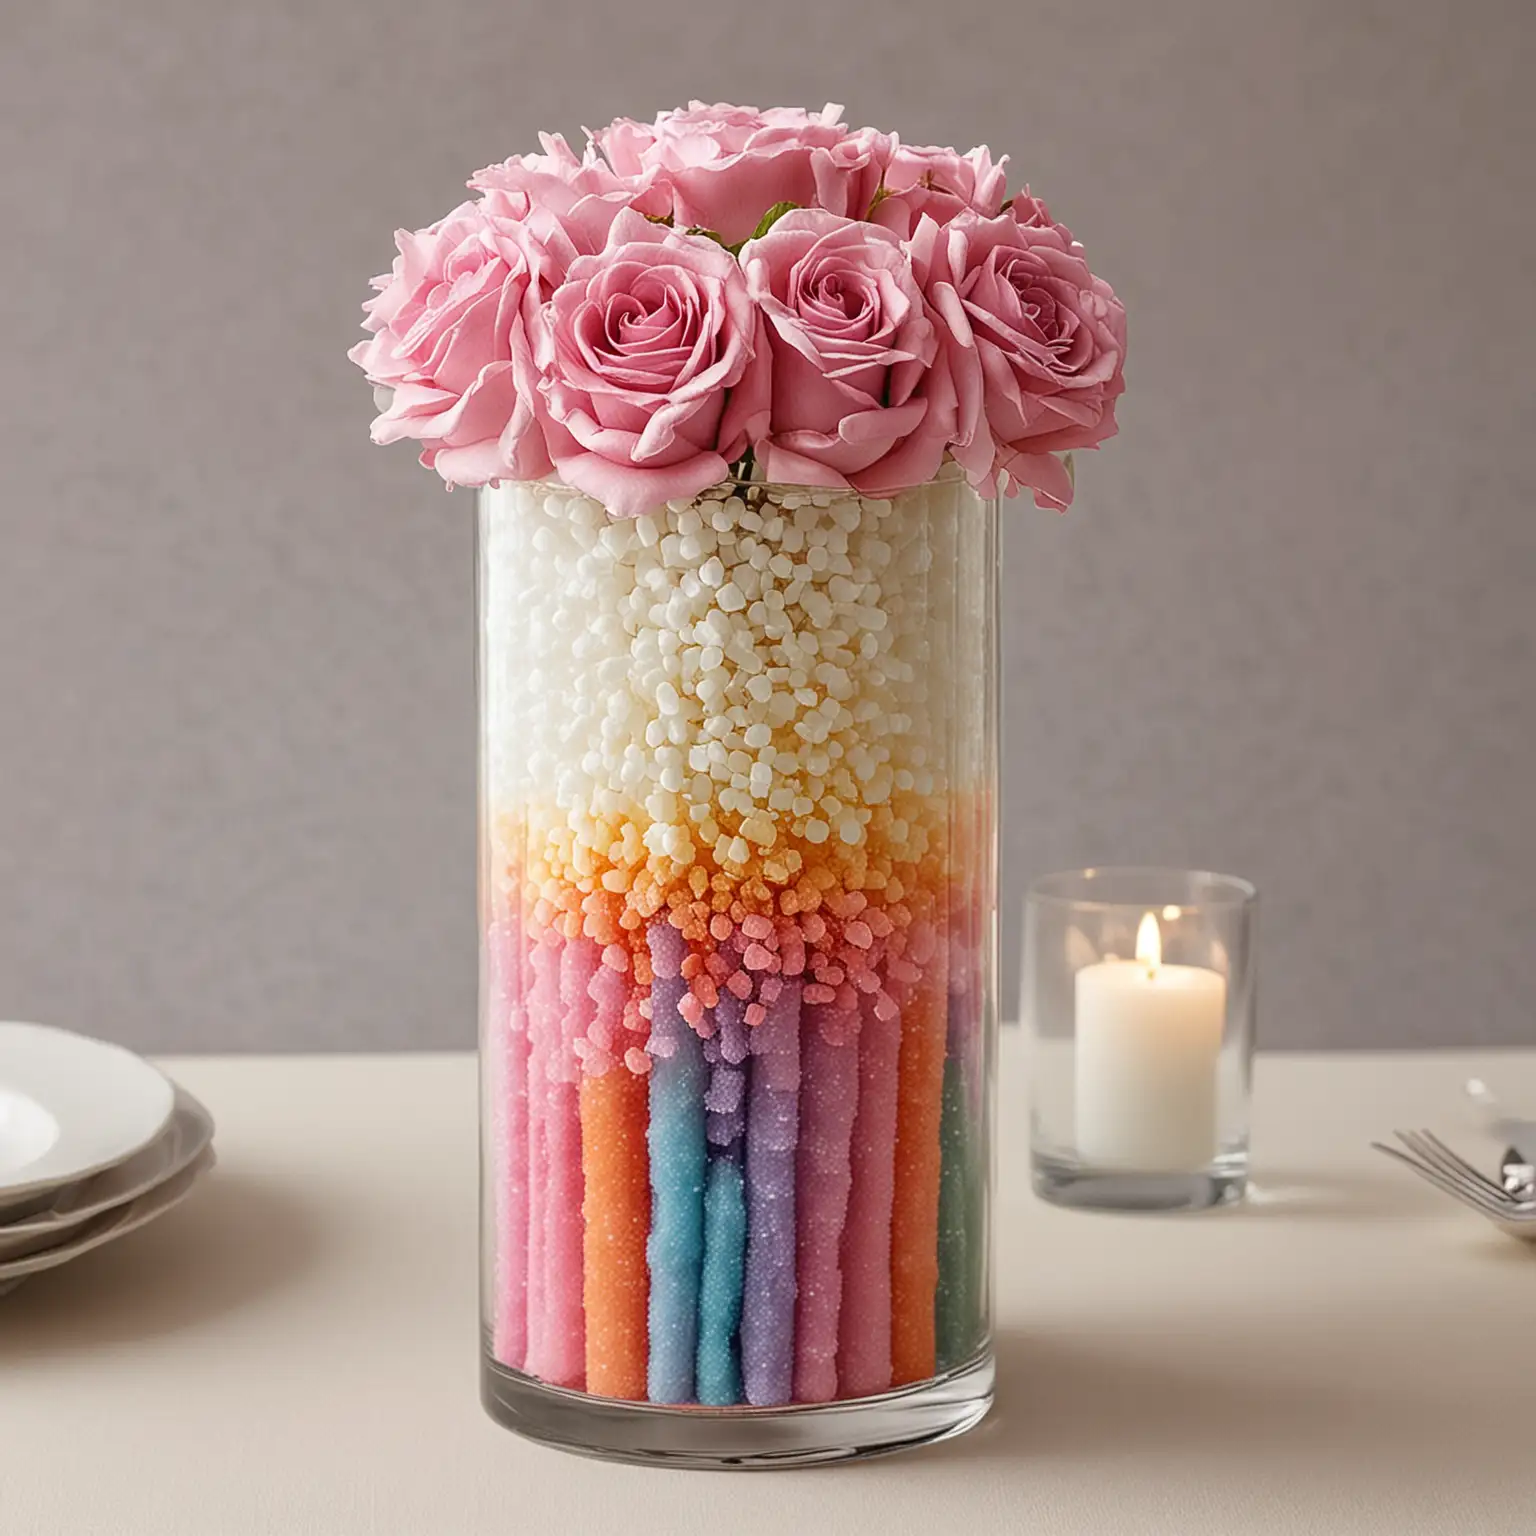 DIY-Wedding-Centerpiece-Glass-Cylinder-Vase-with-Layered-Colored-Sugar